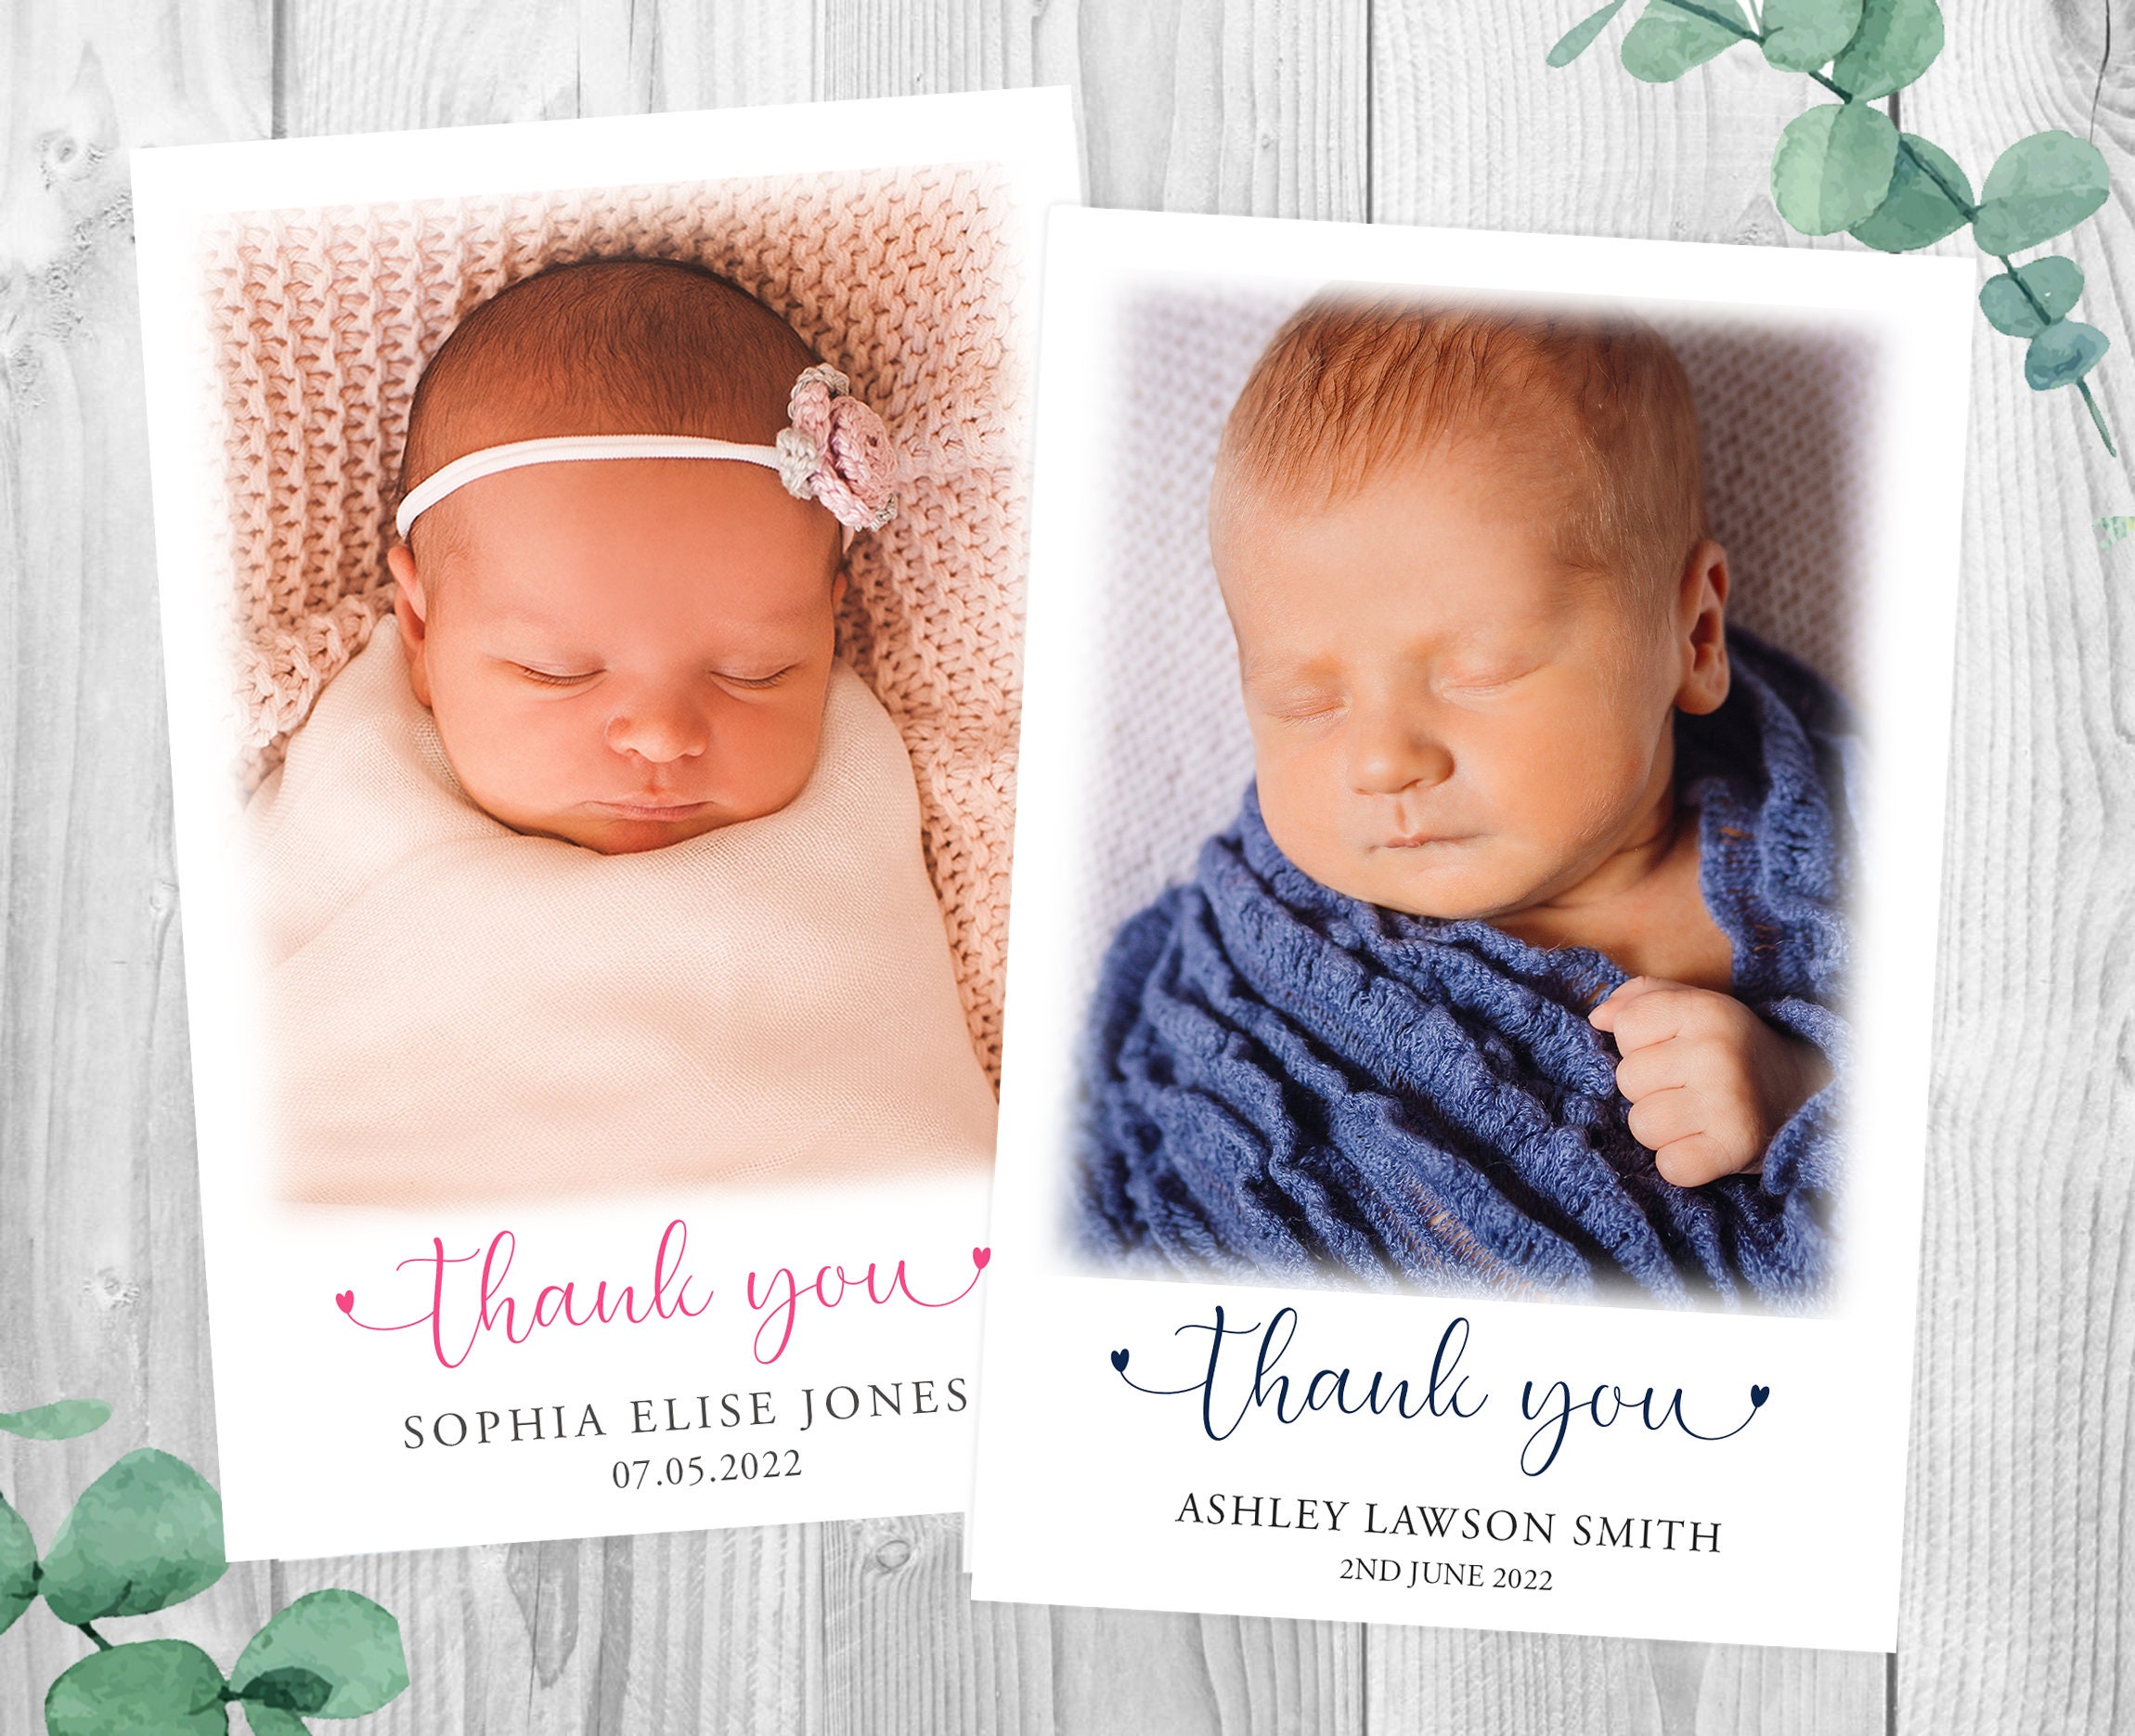 Details about   Personalised Photo New Baby Birth Announcement Thank You Card & Envelopes Pack 